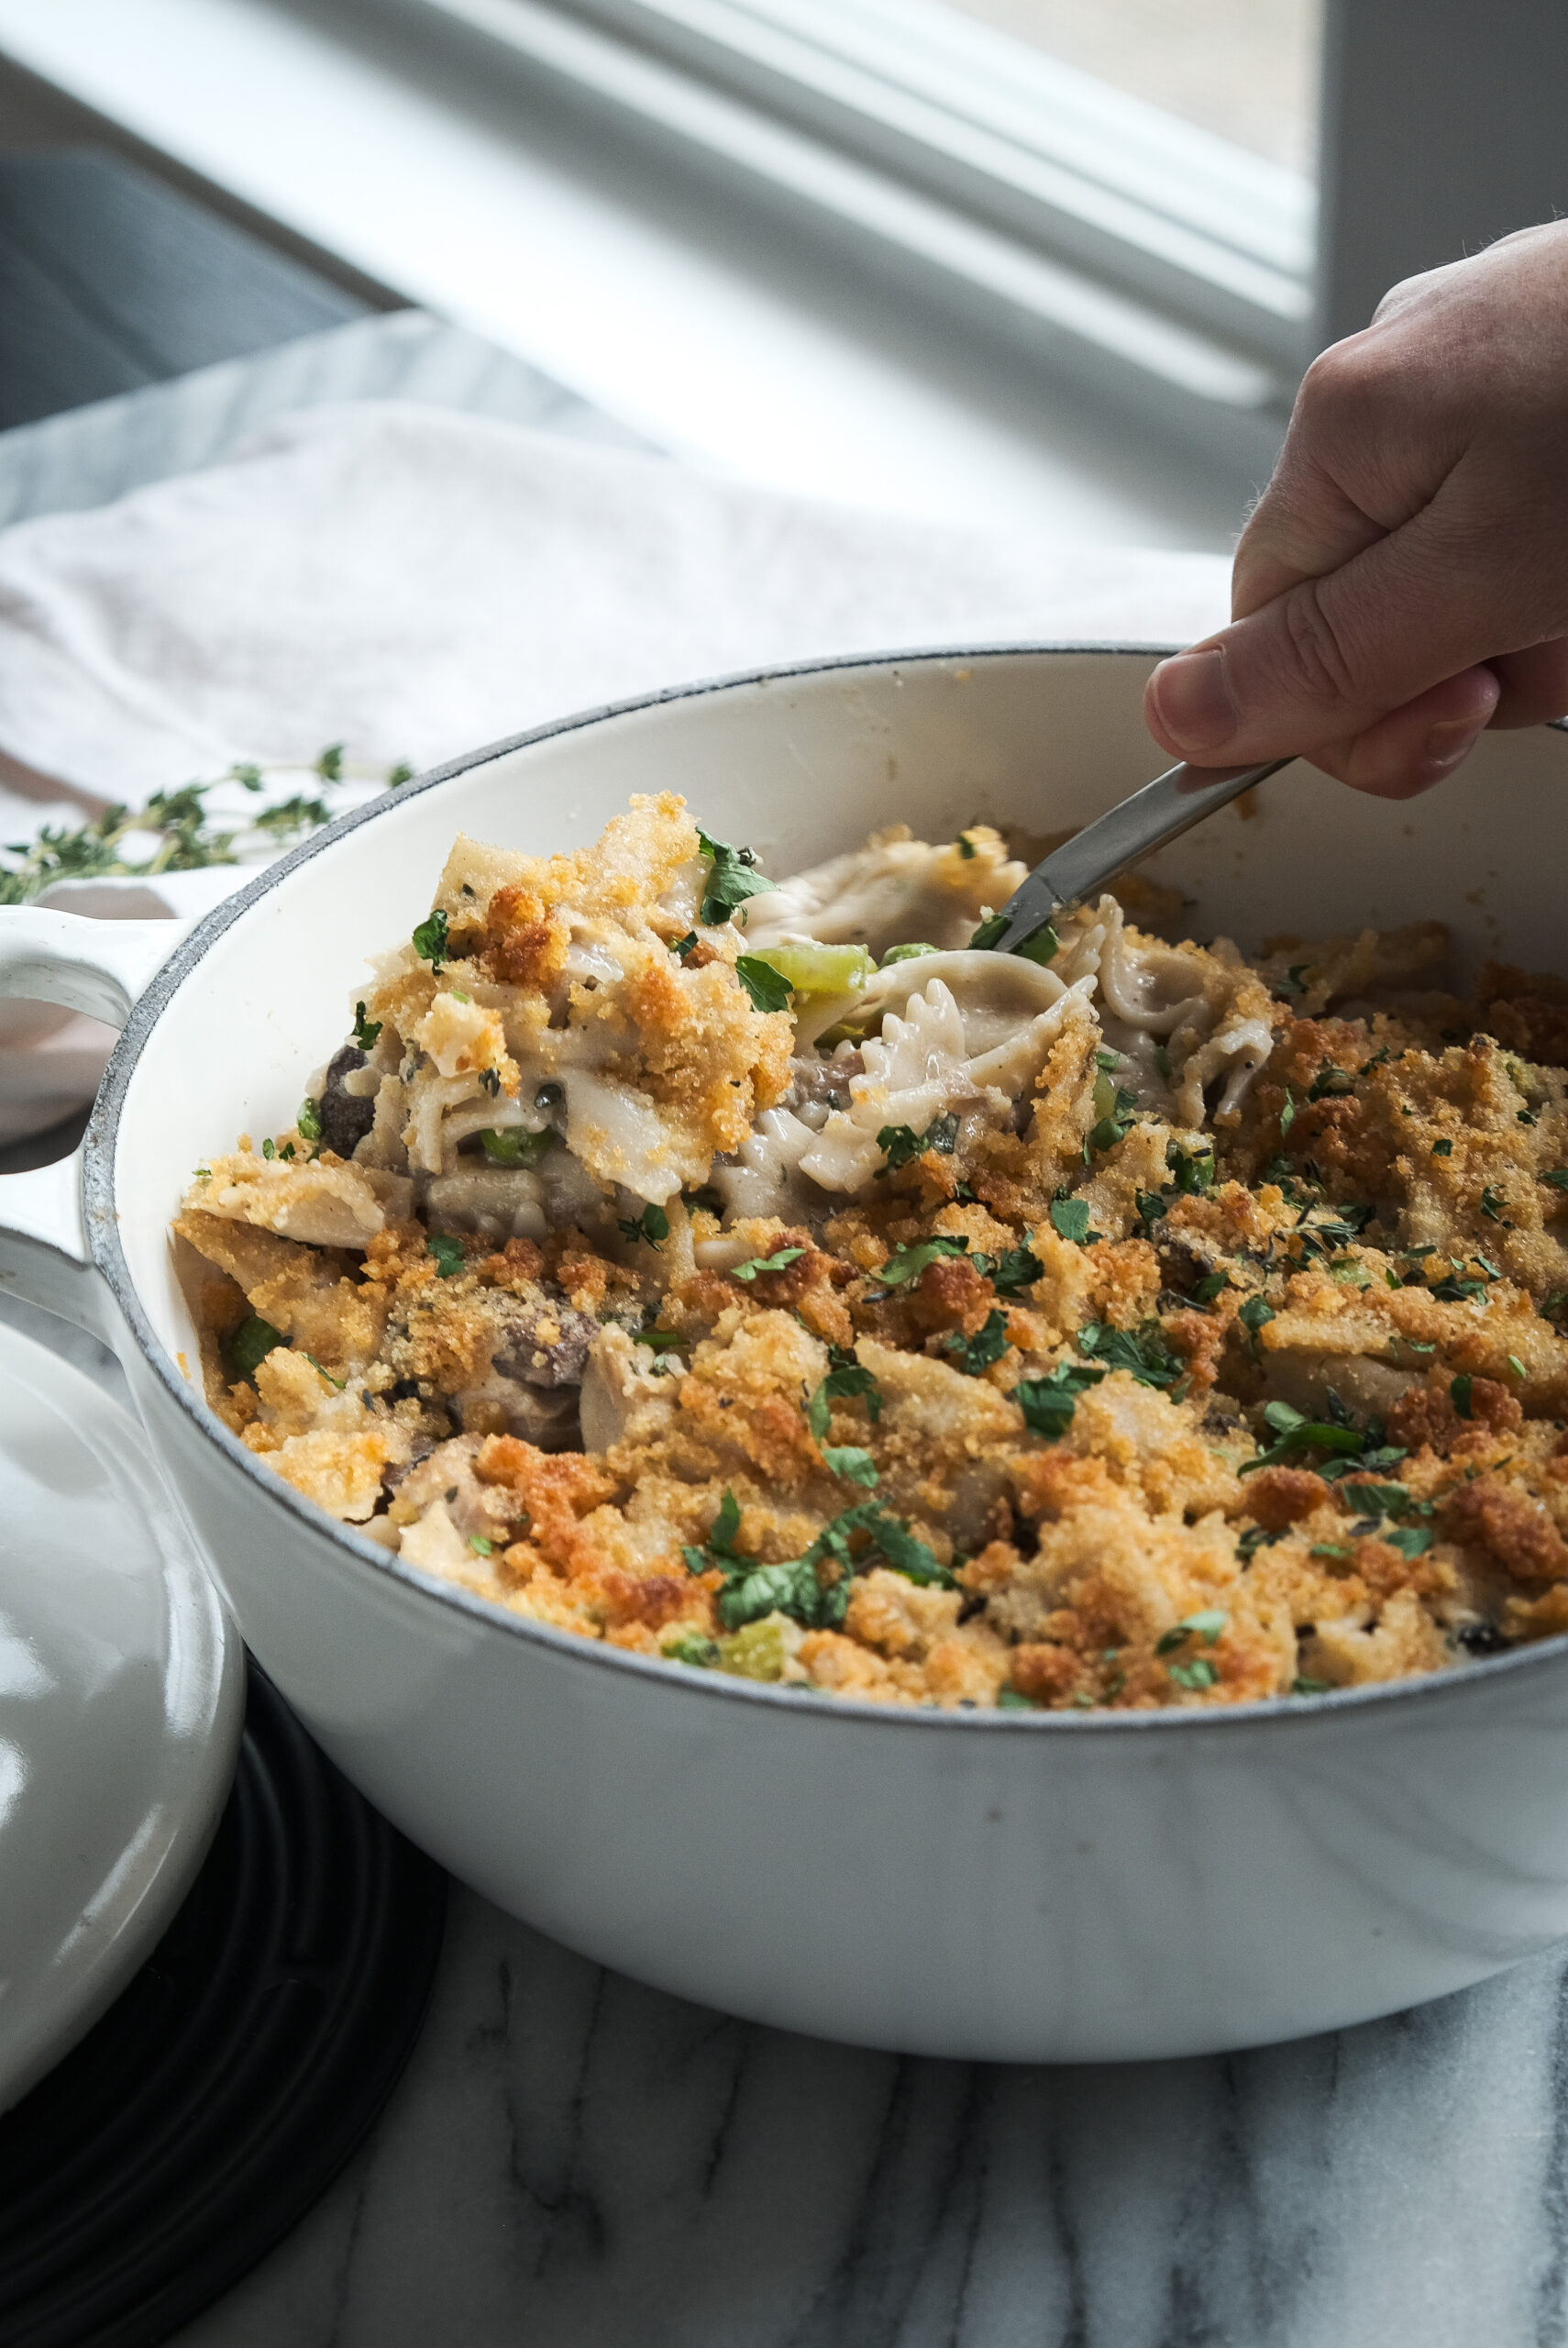 Turkey Casserole with Egg Noodles - Molé in the Wall